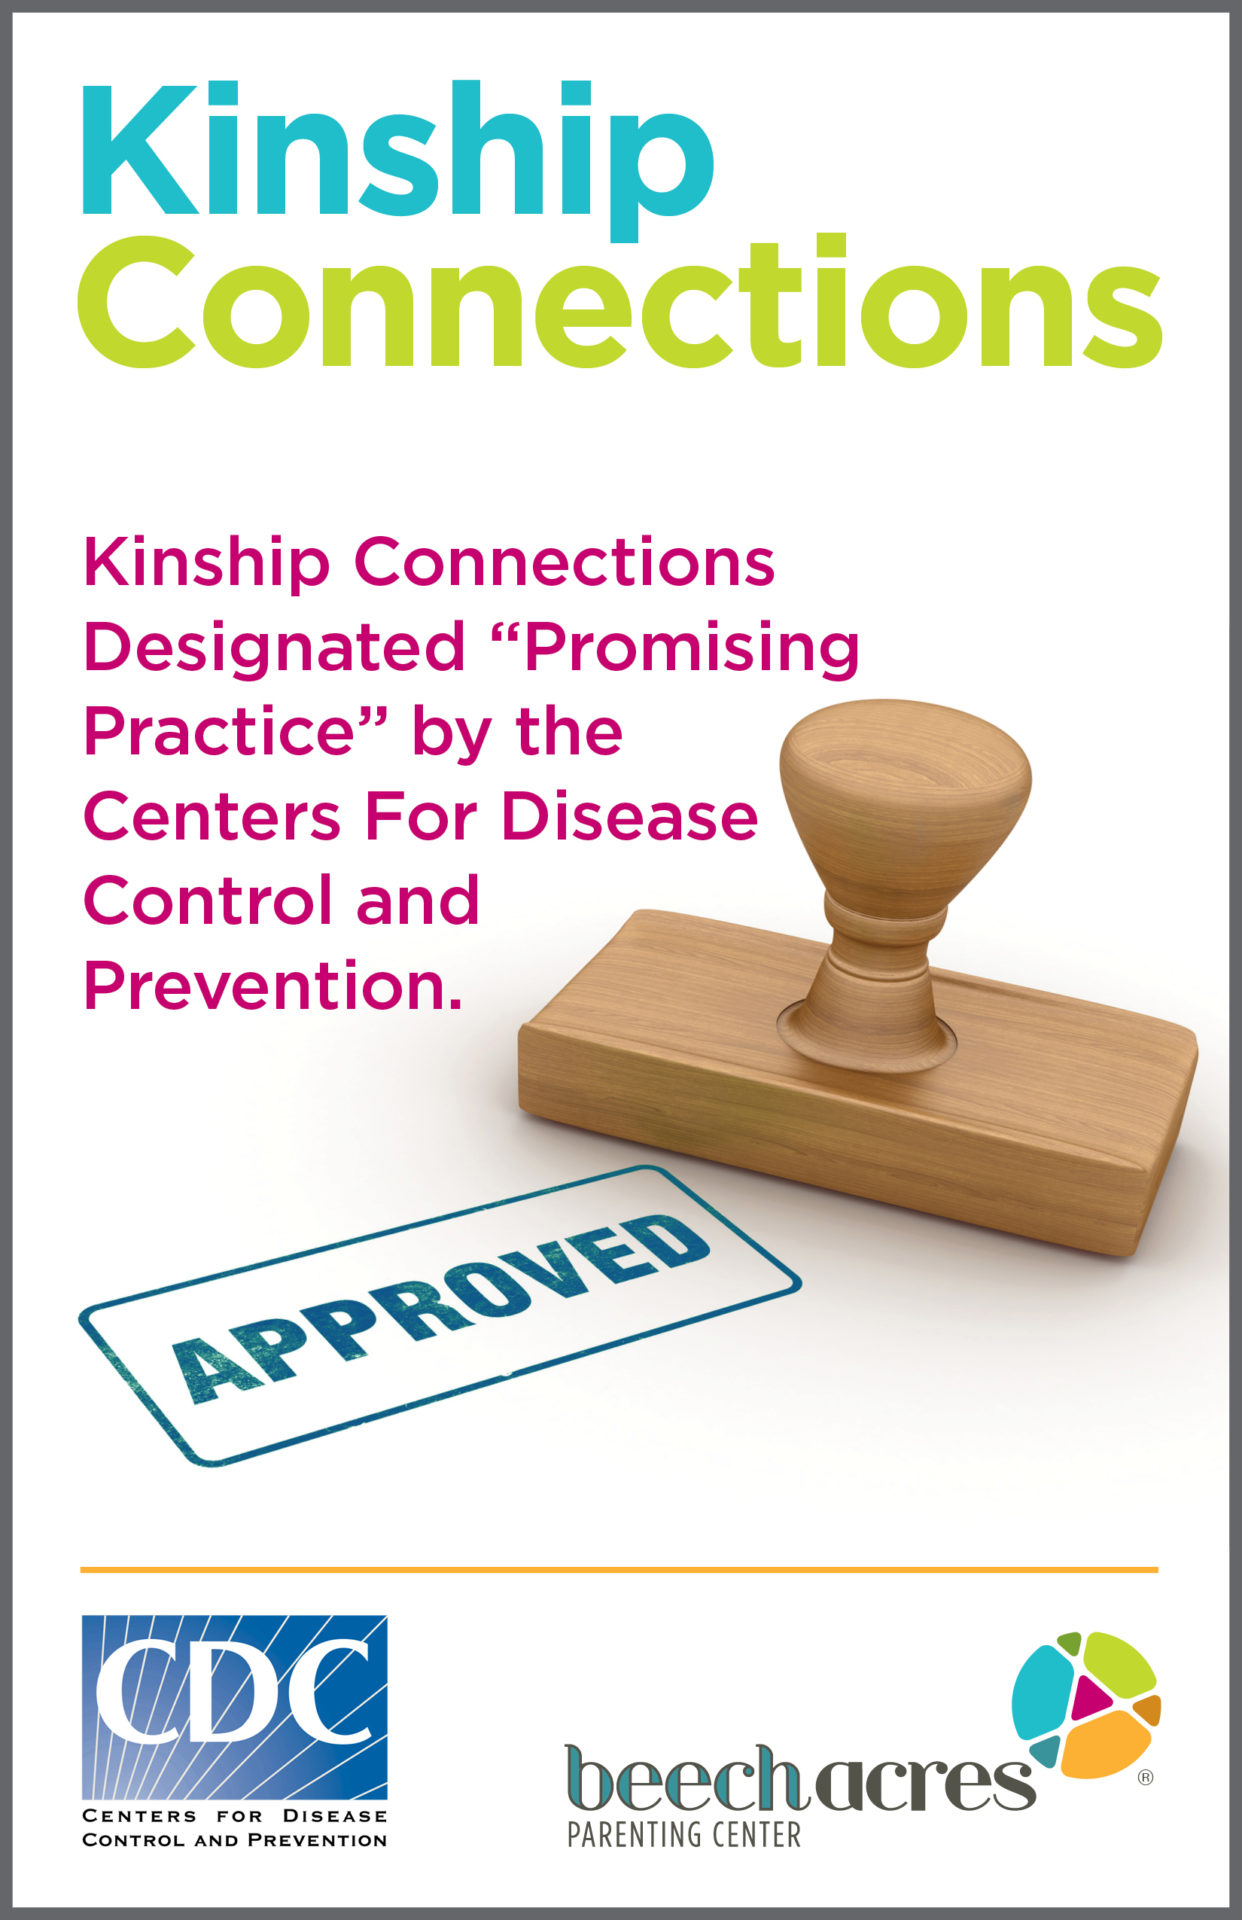 Kinship Connections Designated “Promising Practice” by the Centers for Disease Control and Prevention